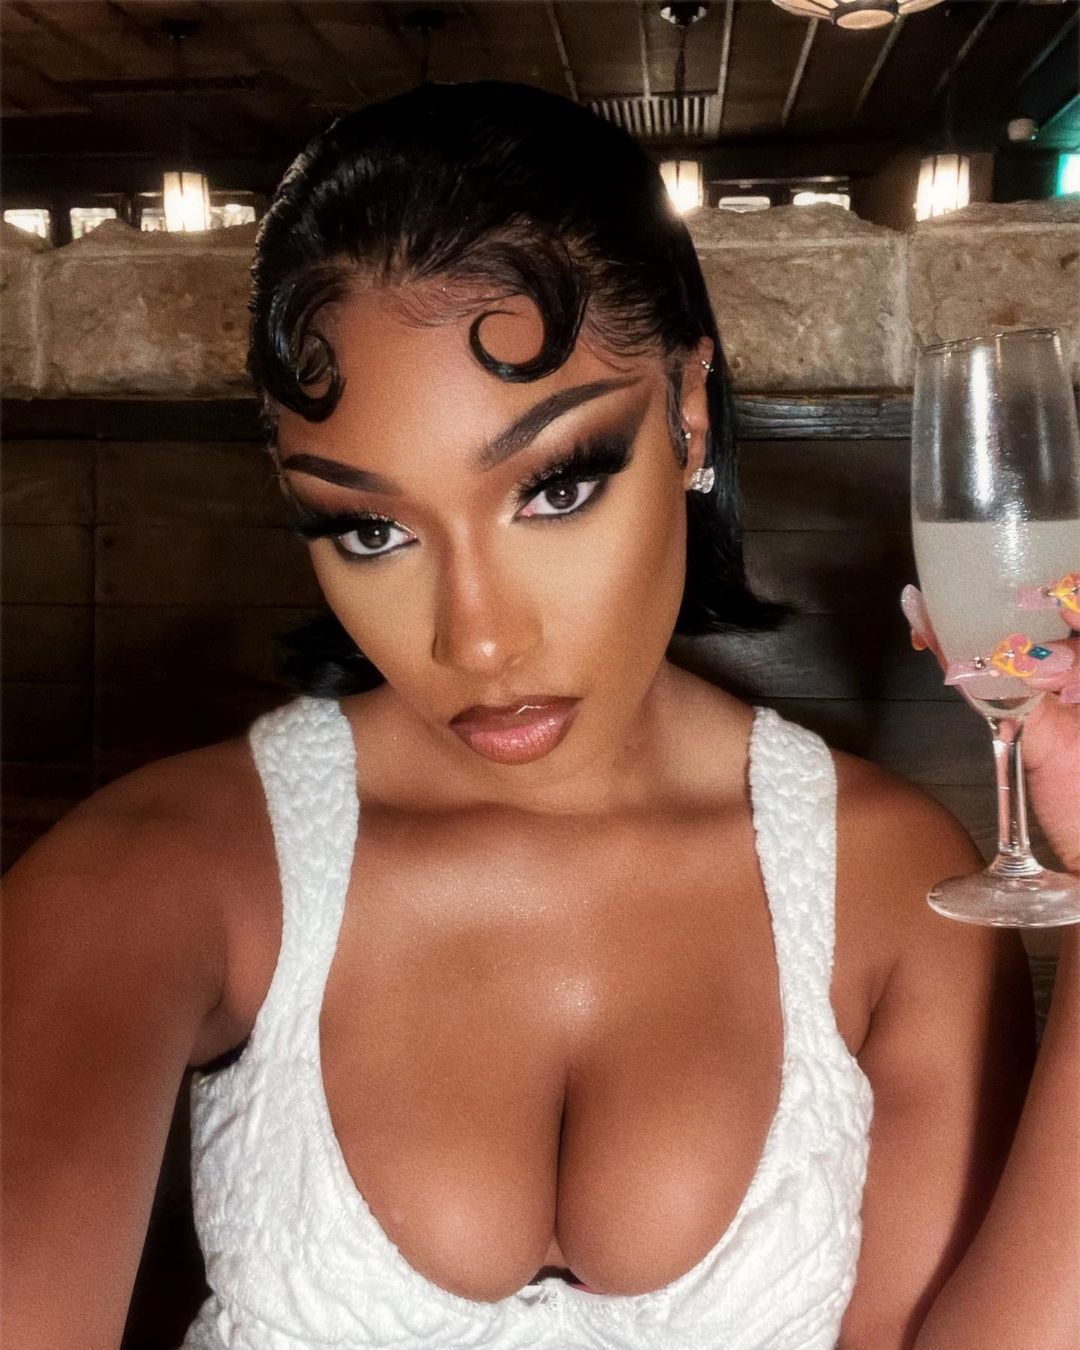 Megan Thee Stallion showed her signs while visiting Japan